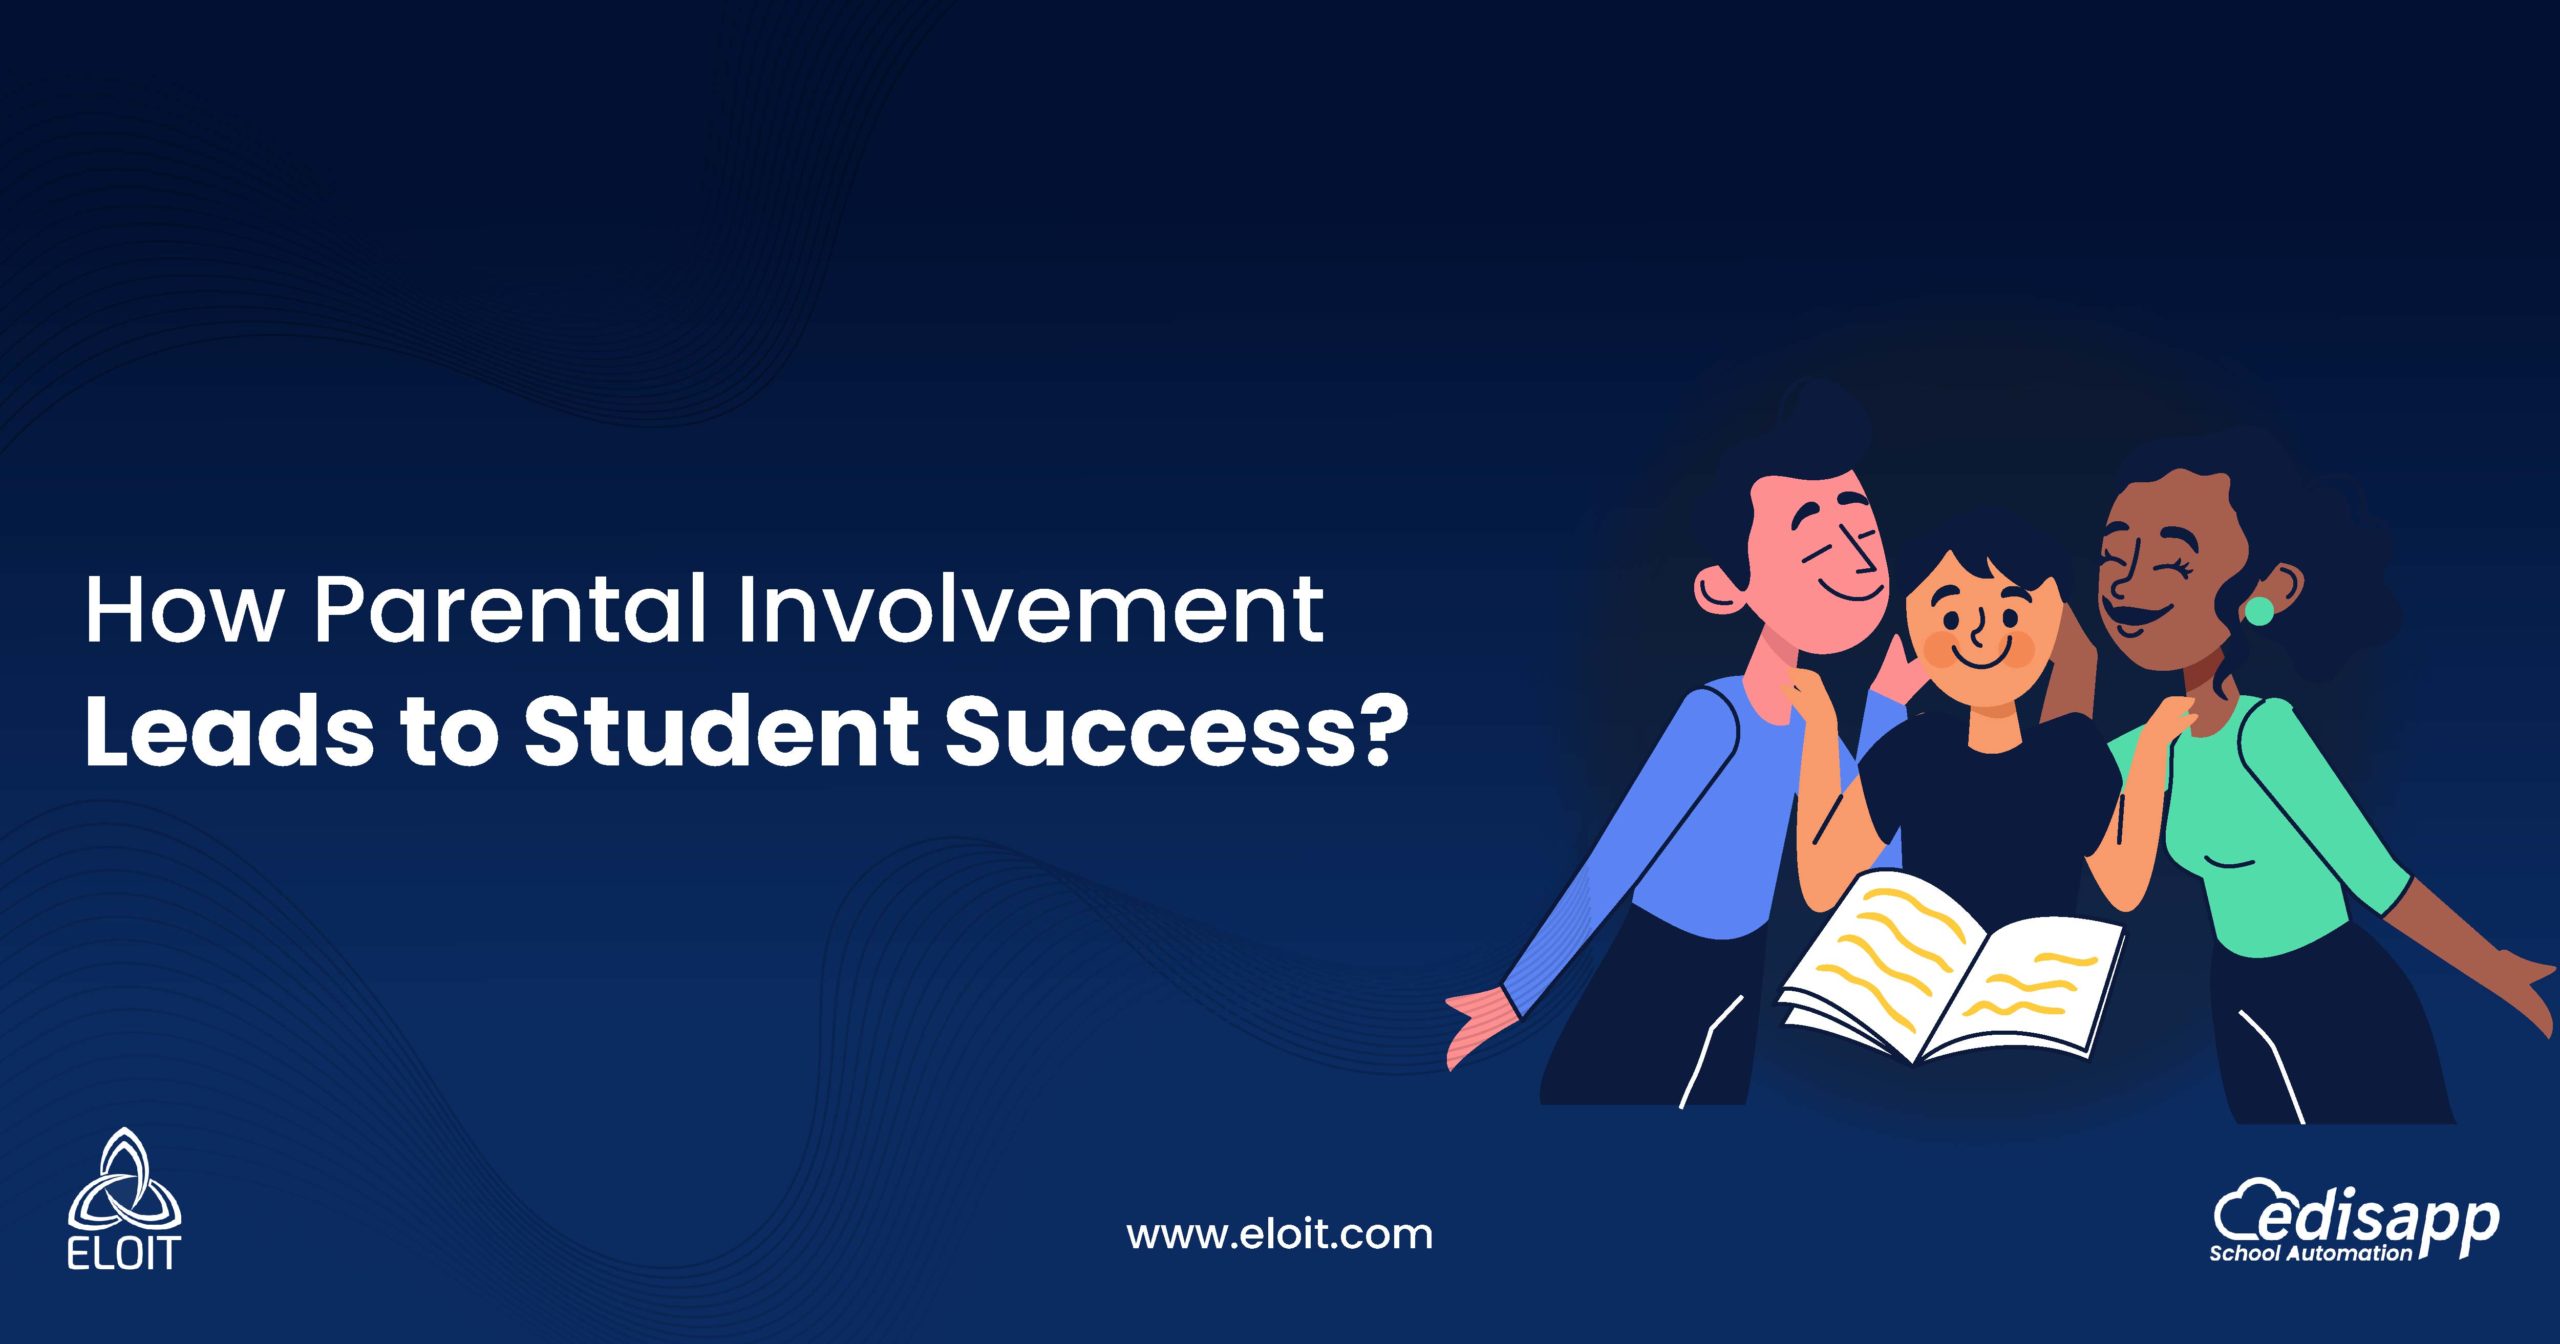 How Parental Involvement Leads to Student Success?